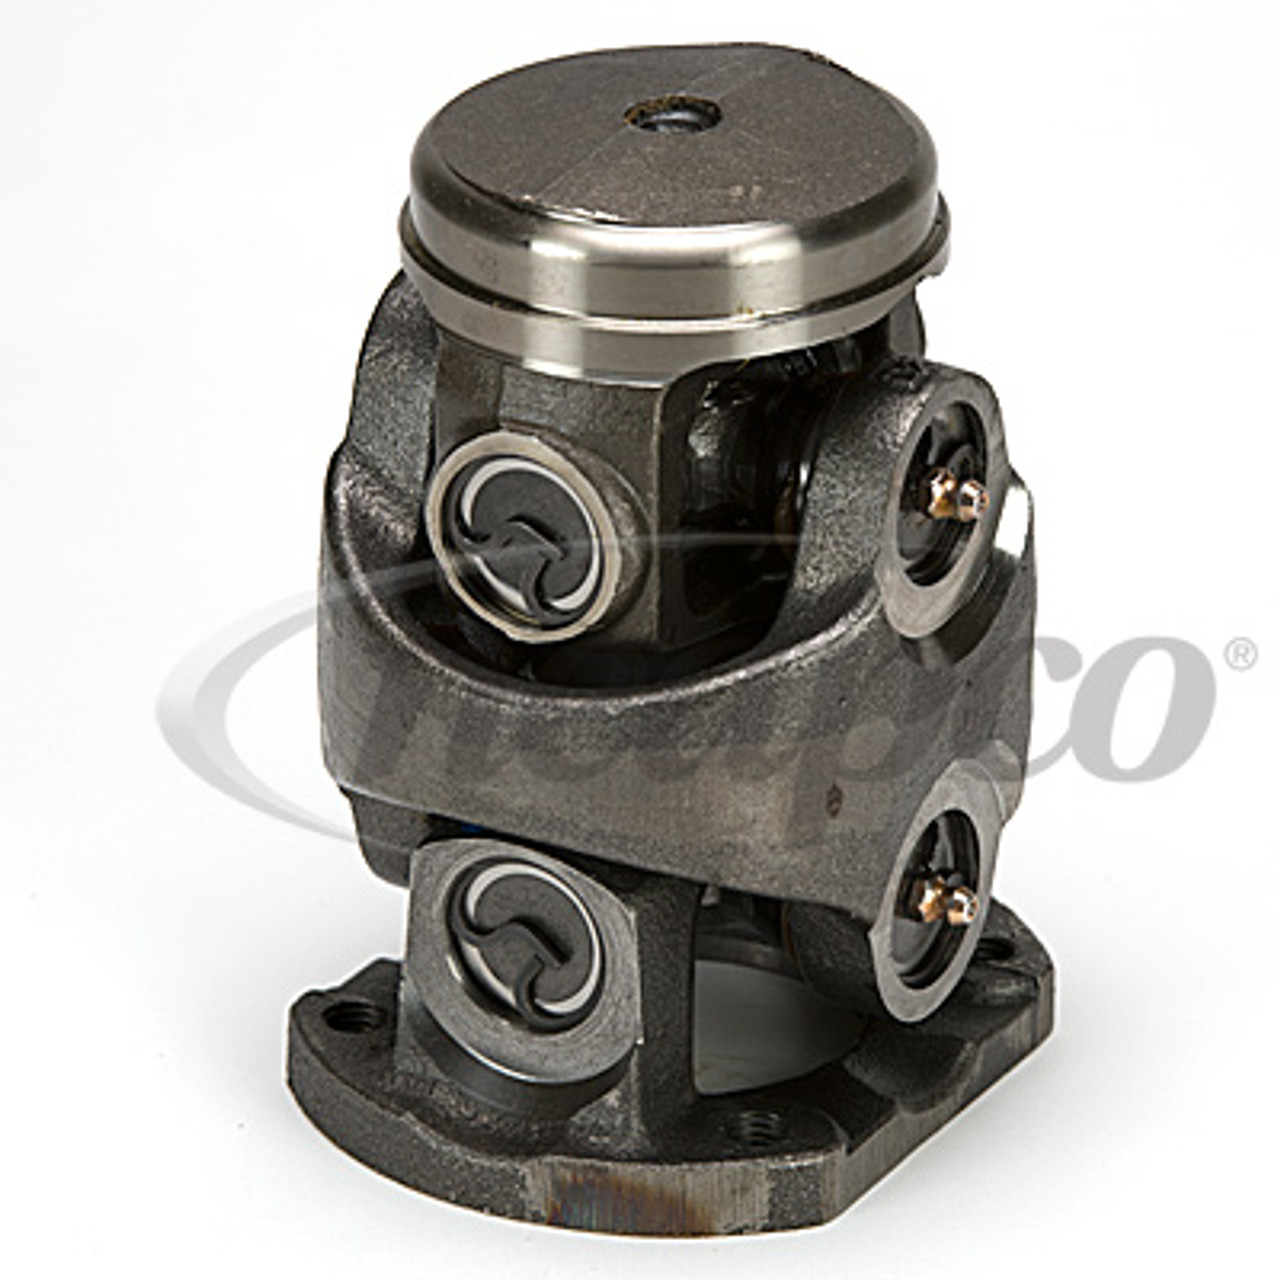 4.250" Flange - 3.500" x .083" Round - Spicer® 1350 Double Cardan CV Head Assembly  N921054